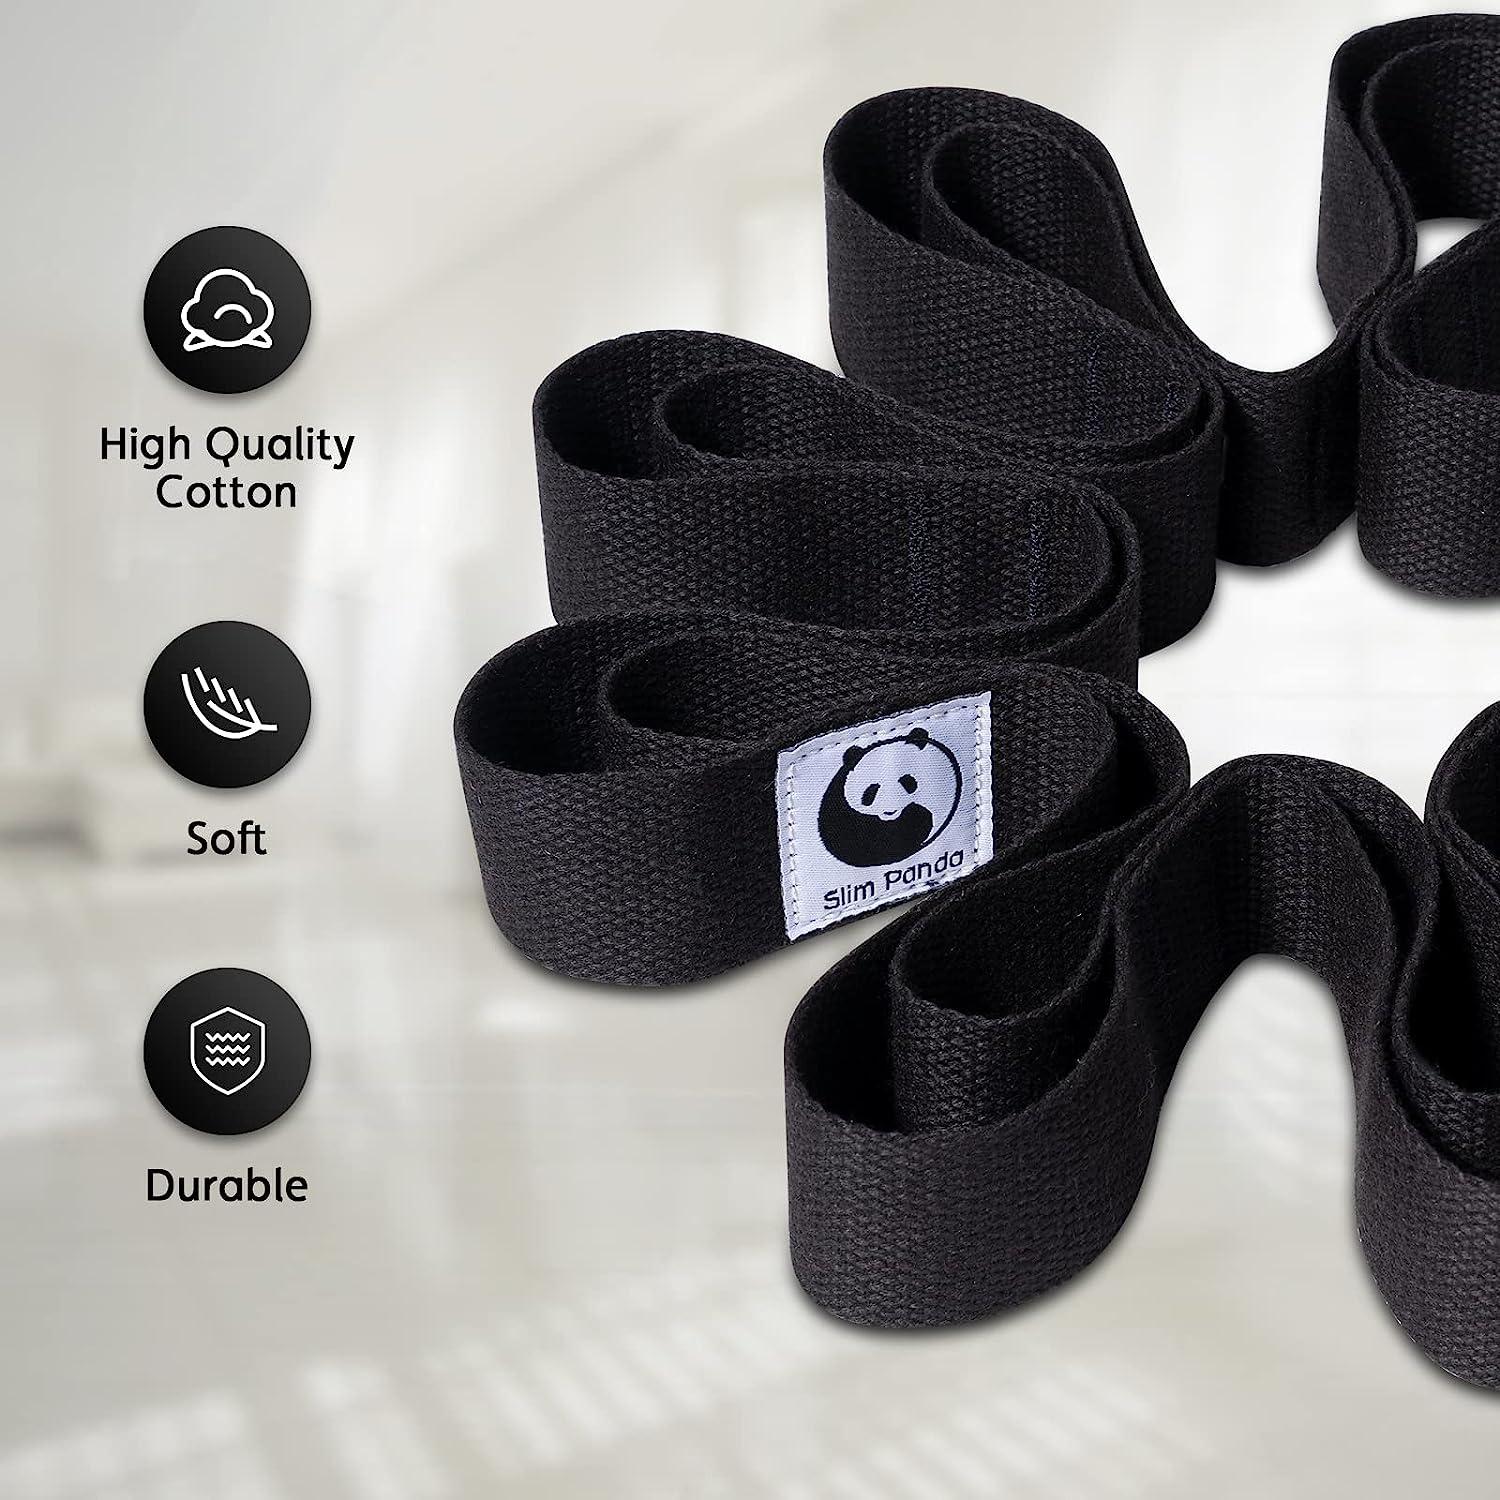 Slim Panda Yoga Stretch Strap,10 Loops Strap for  Physiotherapy,Yoga,Pilates,Exercise, Dance,and Gymnastics,Soft and  Durable,Suitable for Home Exercise